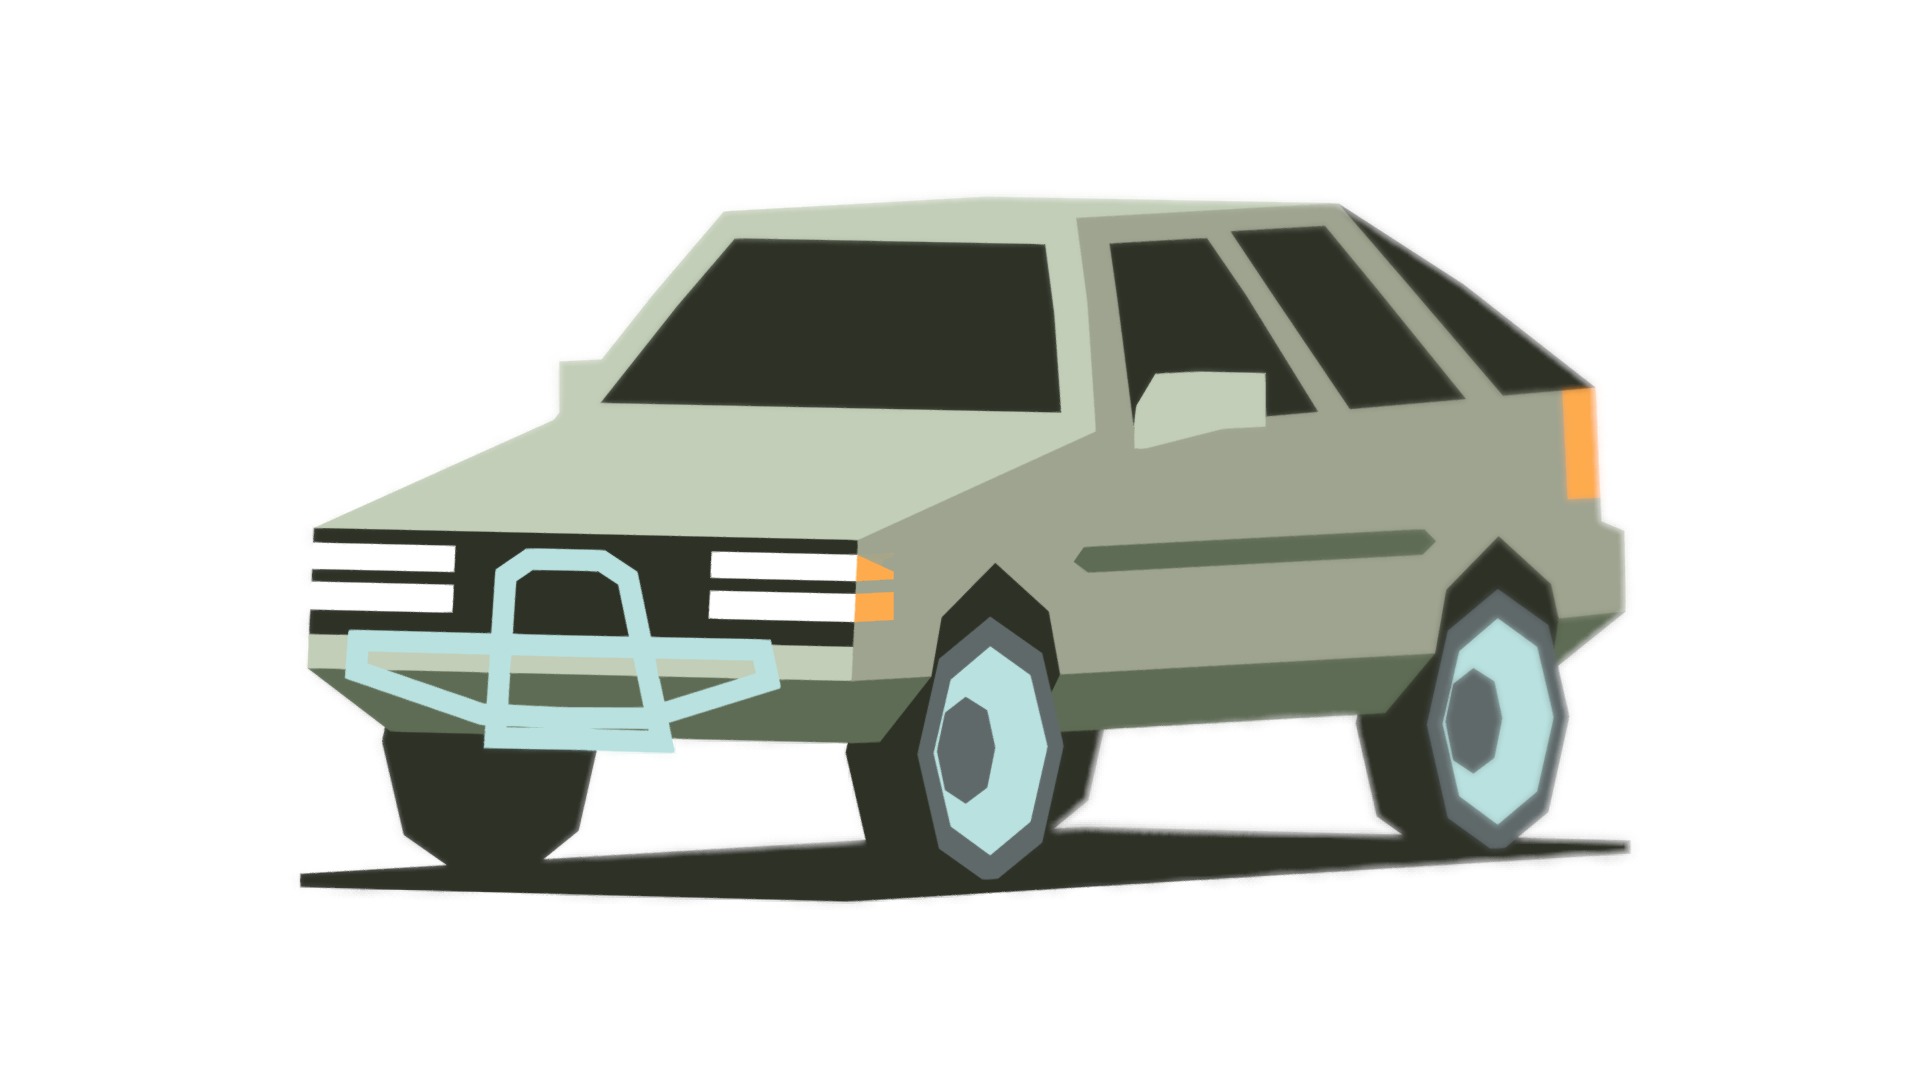 3D model lowpoly car v.1 - This is a 3D model of the lowpoly car v.1. The 3D model is about a white and black vehicle.